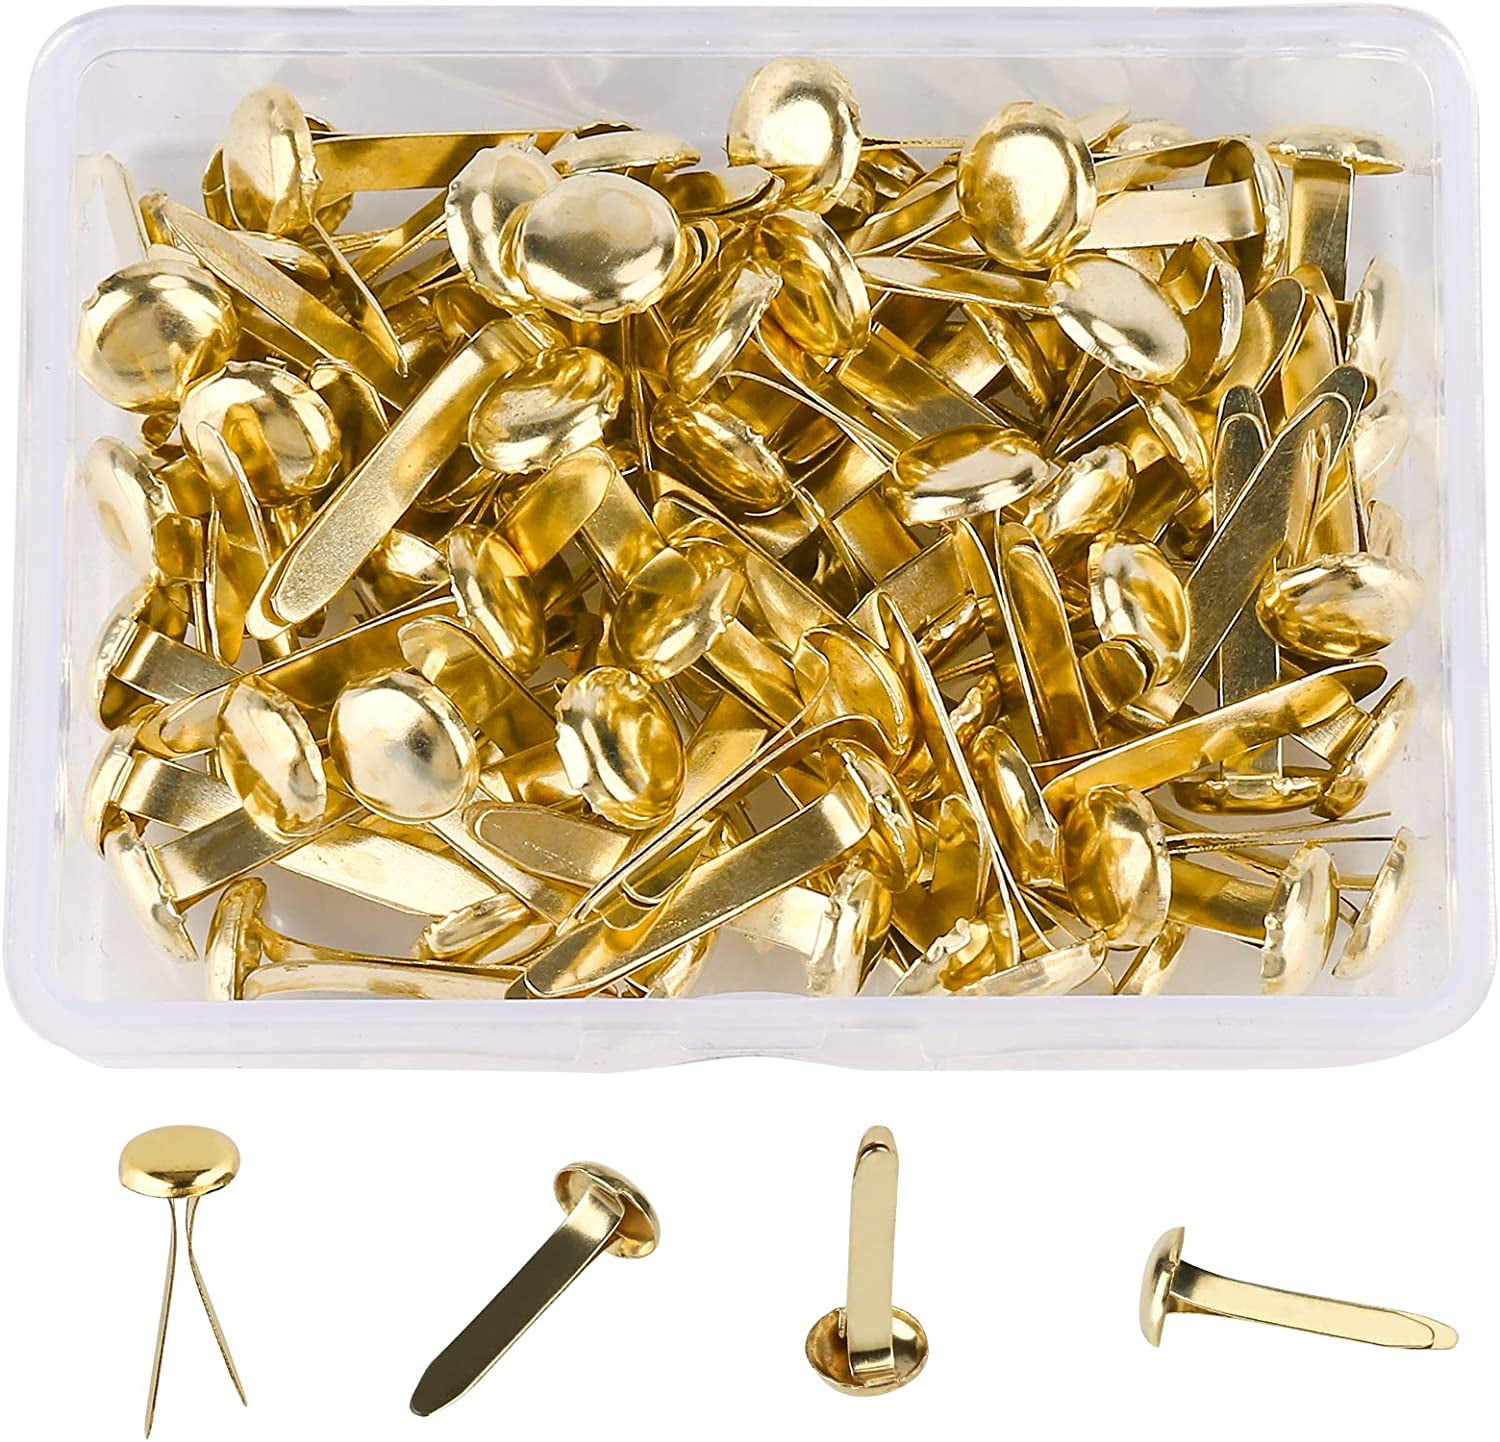 10 Pieces of Metal Brad Fasteners with Pull Rings Mini Brad Paper